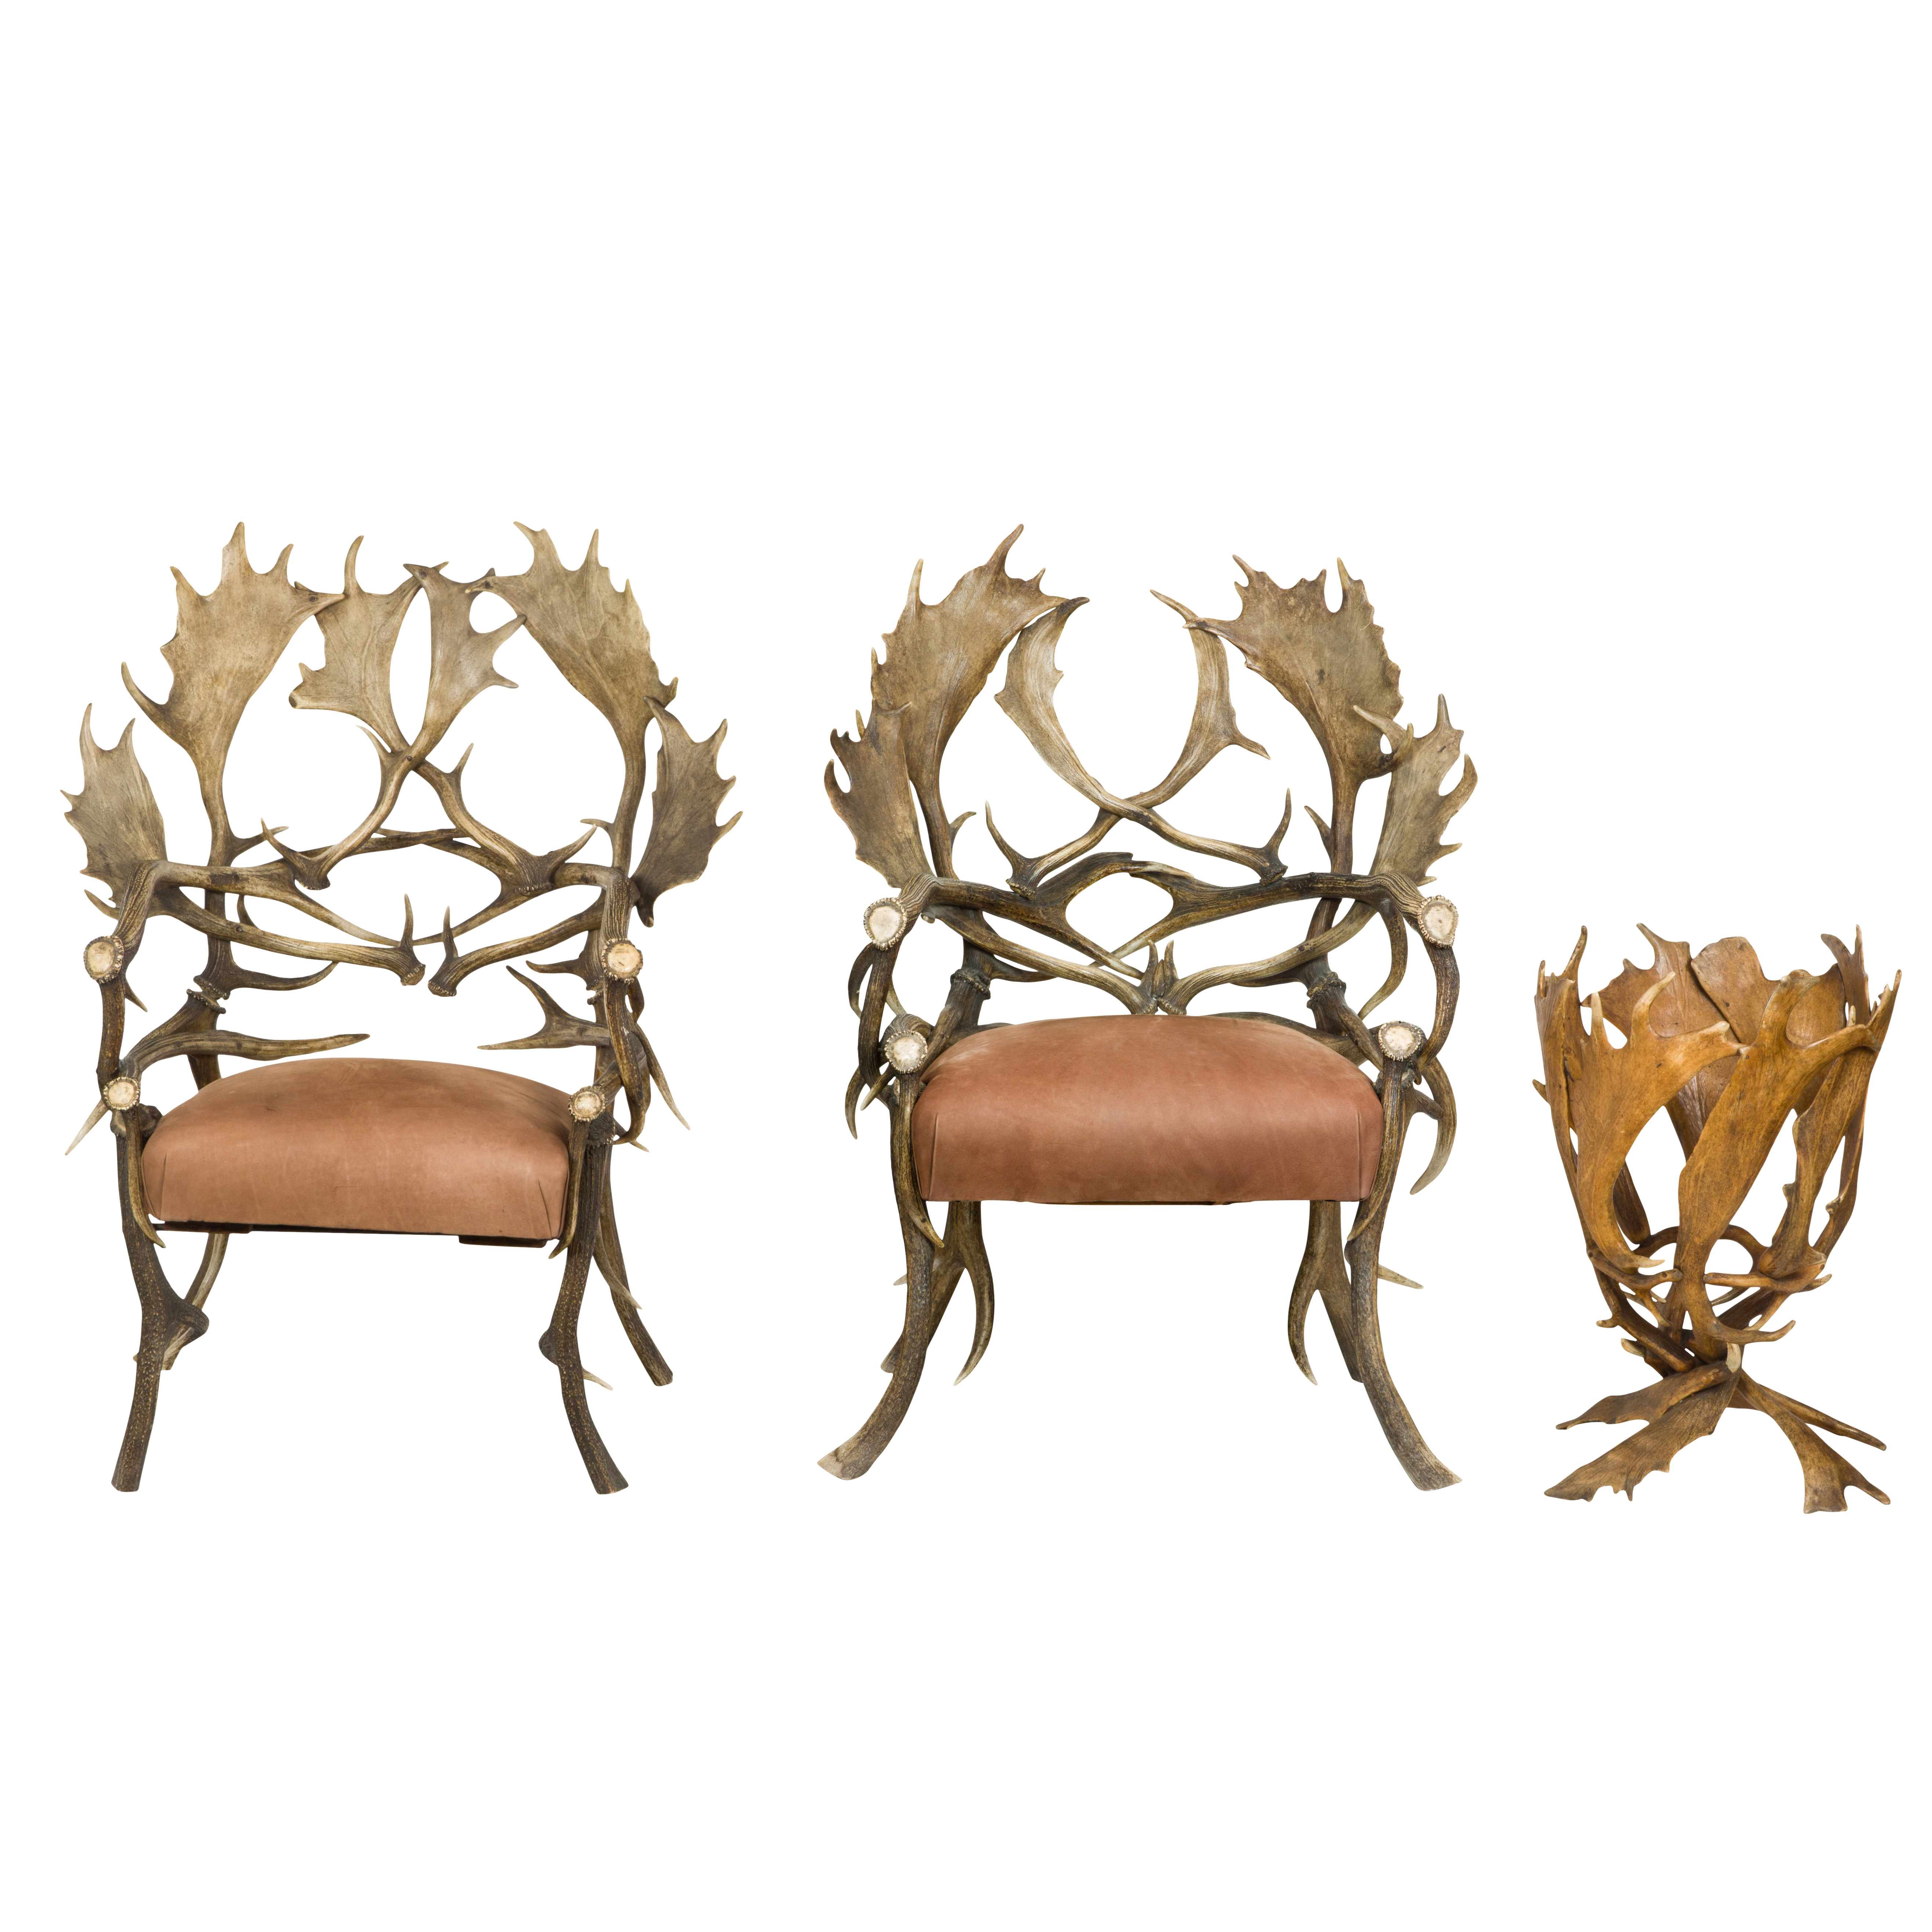  LOT OF 3 ANTLER FURNITURE GROUP 3a3514